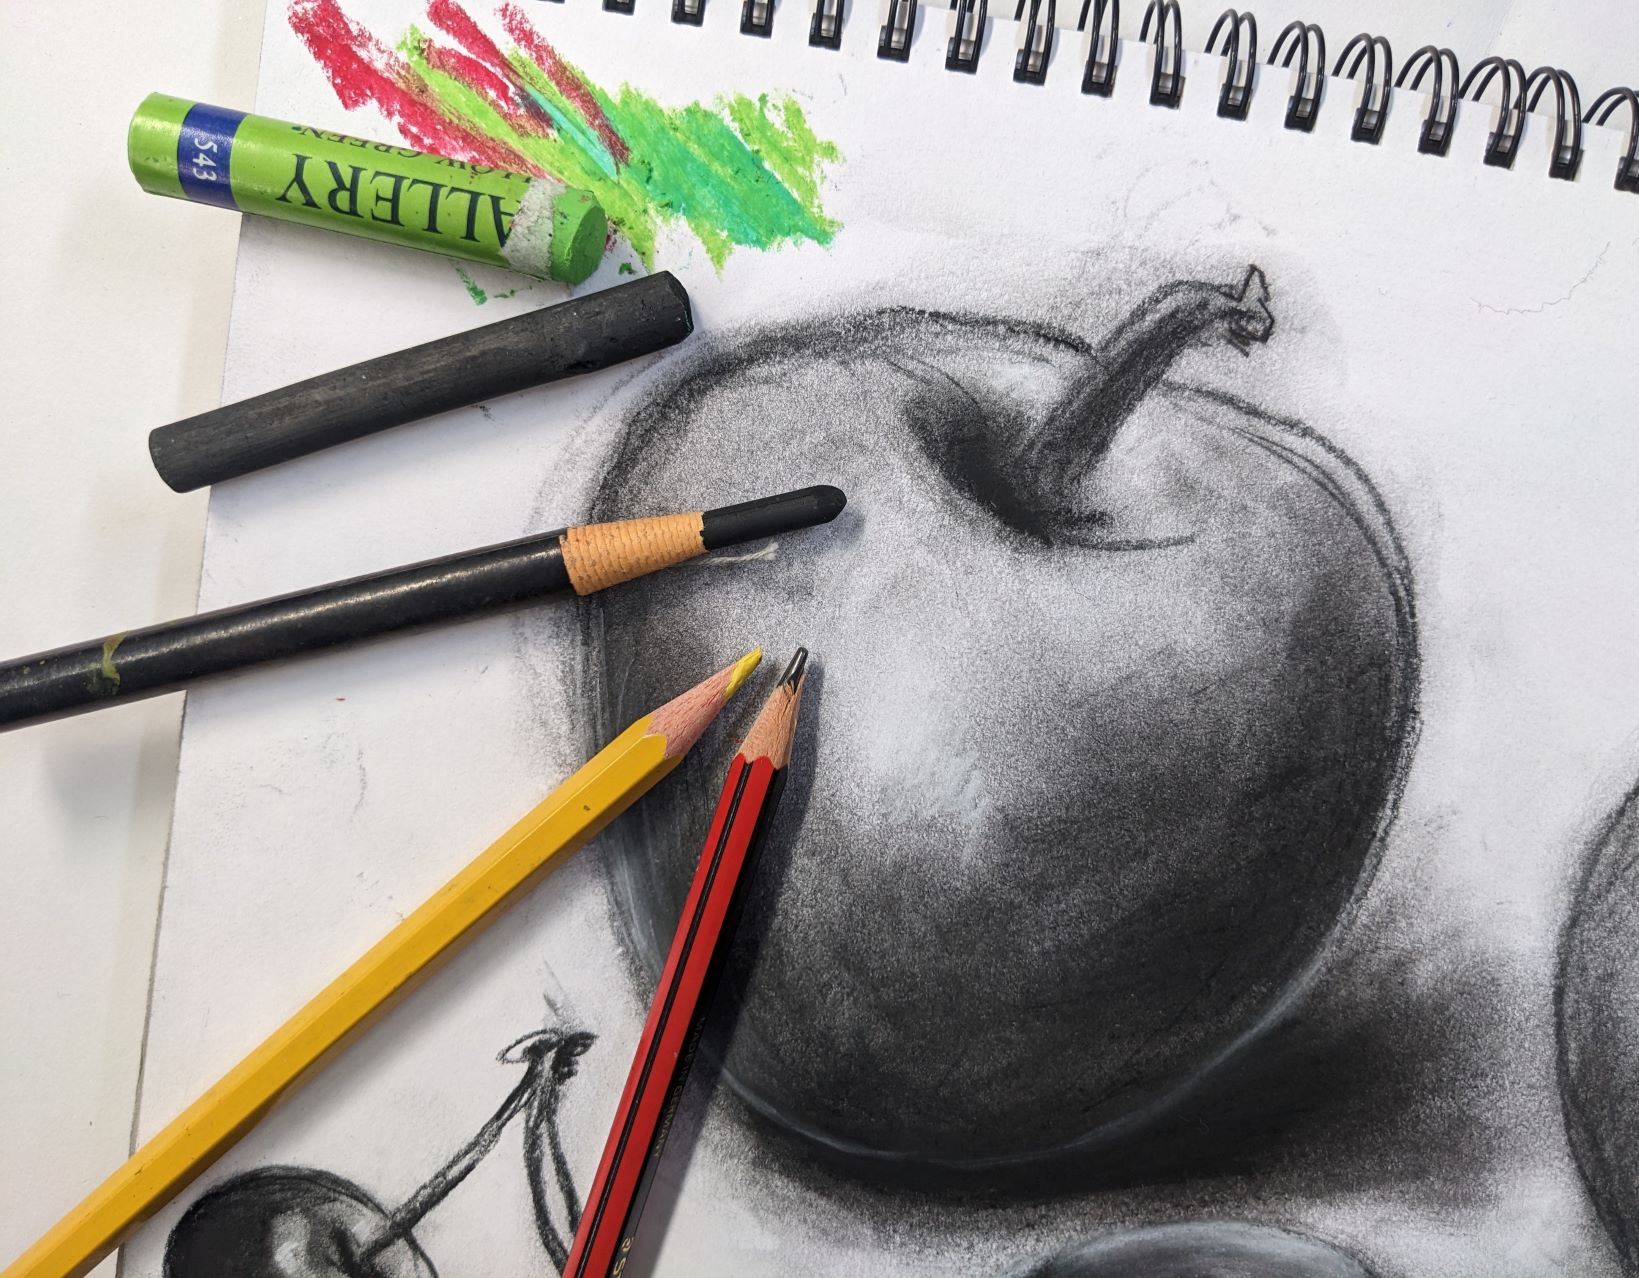 Throwback Thursday: Another still life pencil drawing